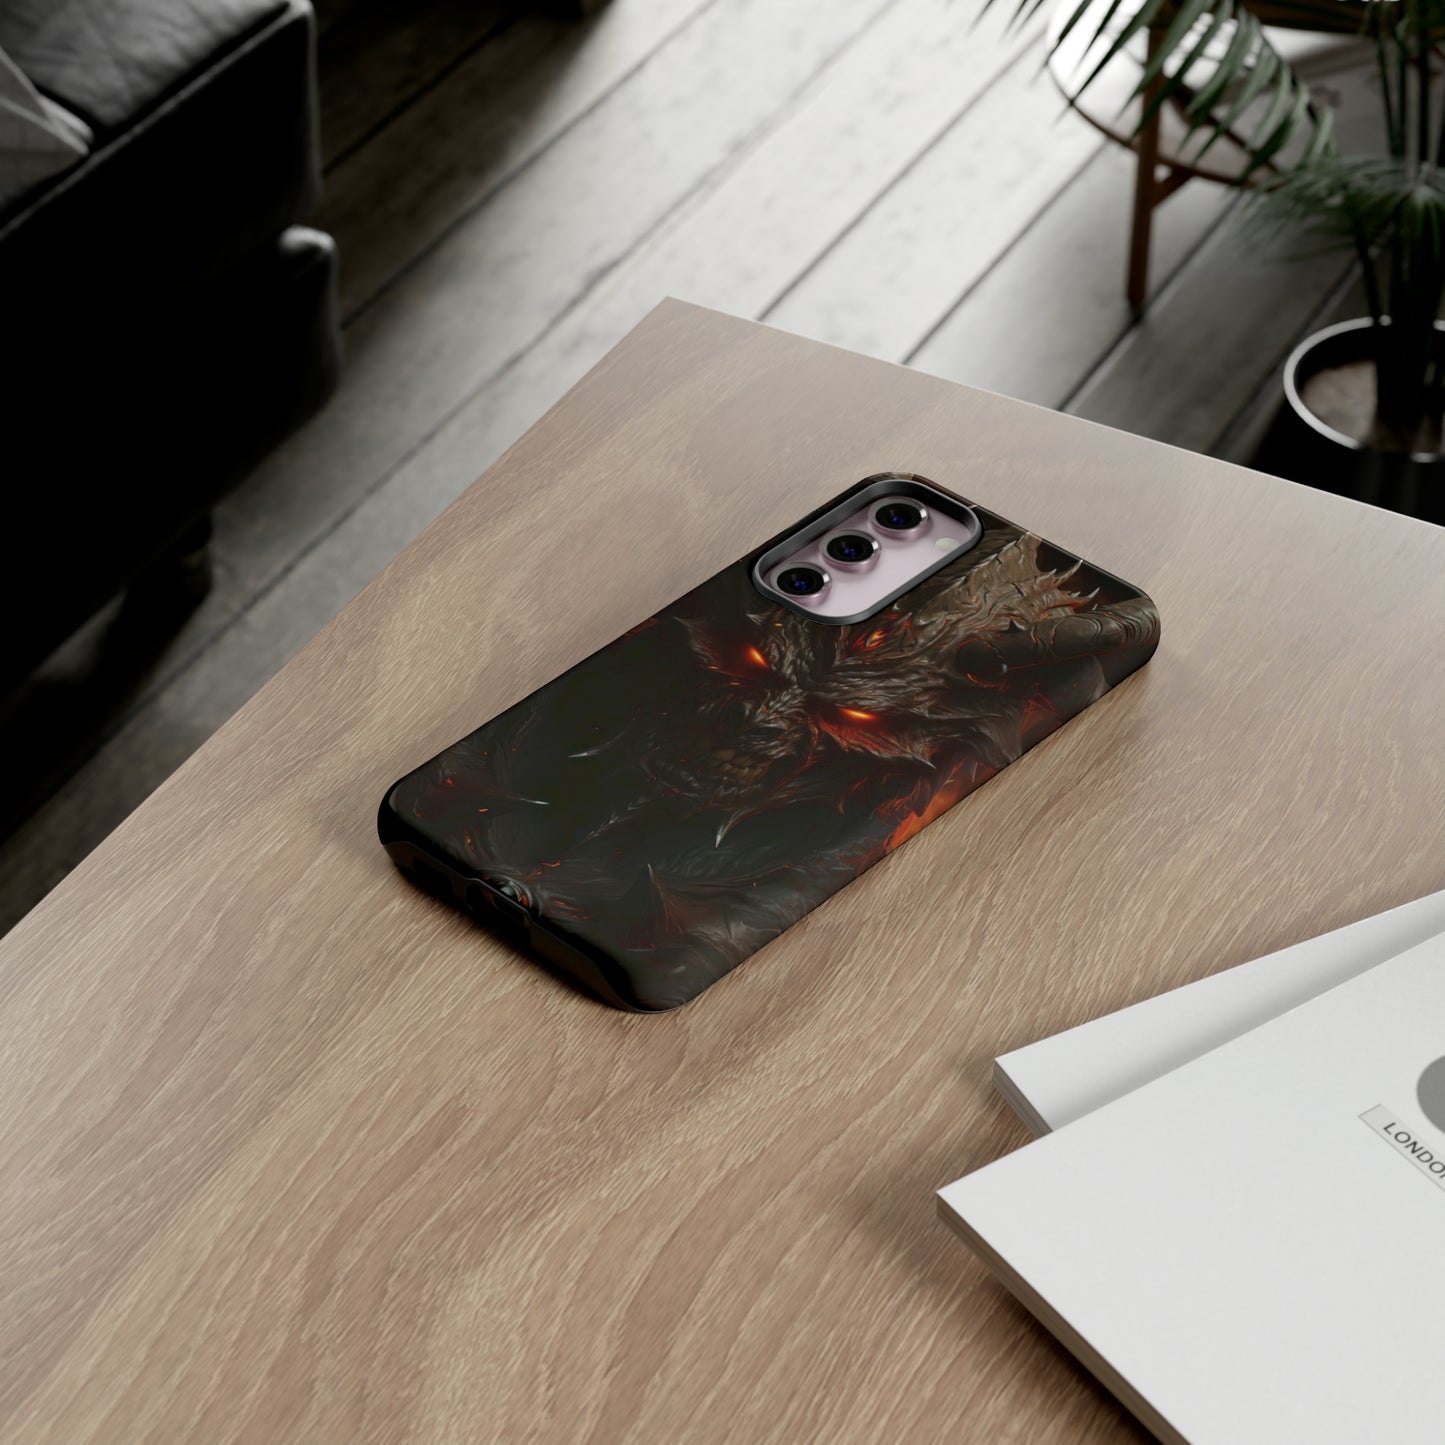 Angry Stone Demon Protective Phone Case - Fiery Gaze Design for iPhone, Samsung, Pixel